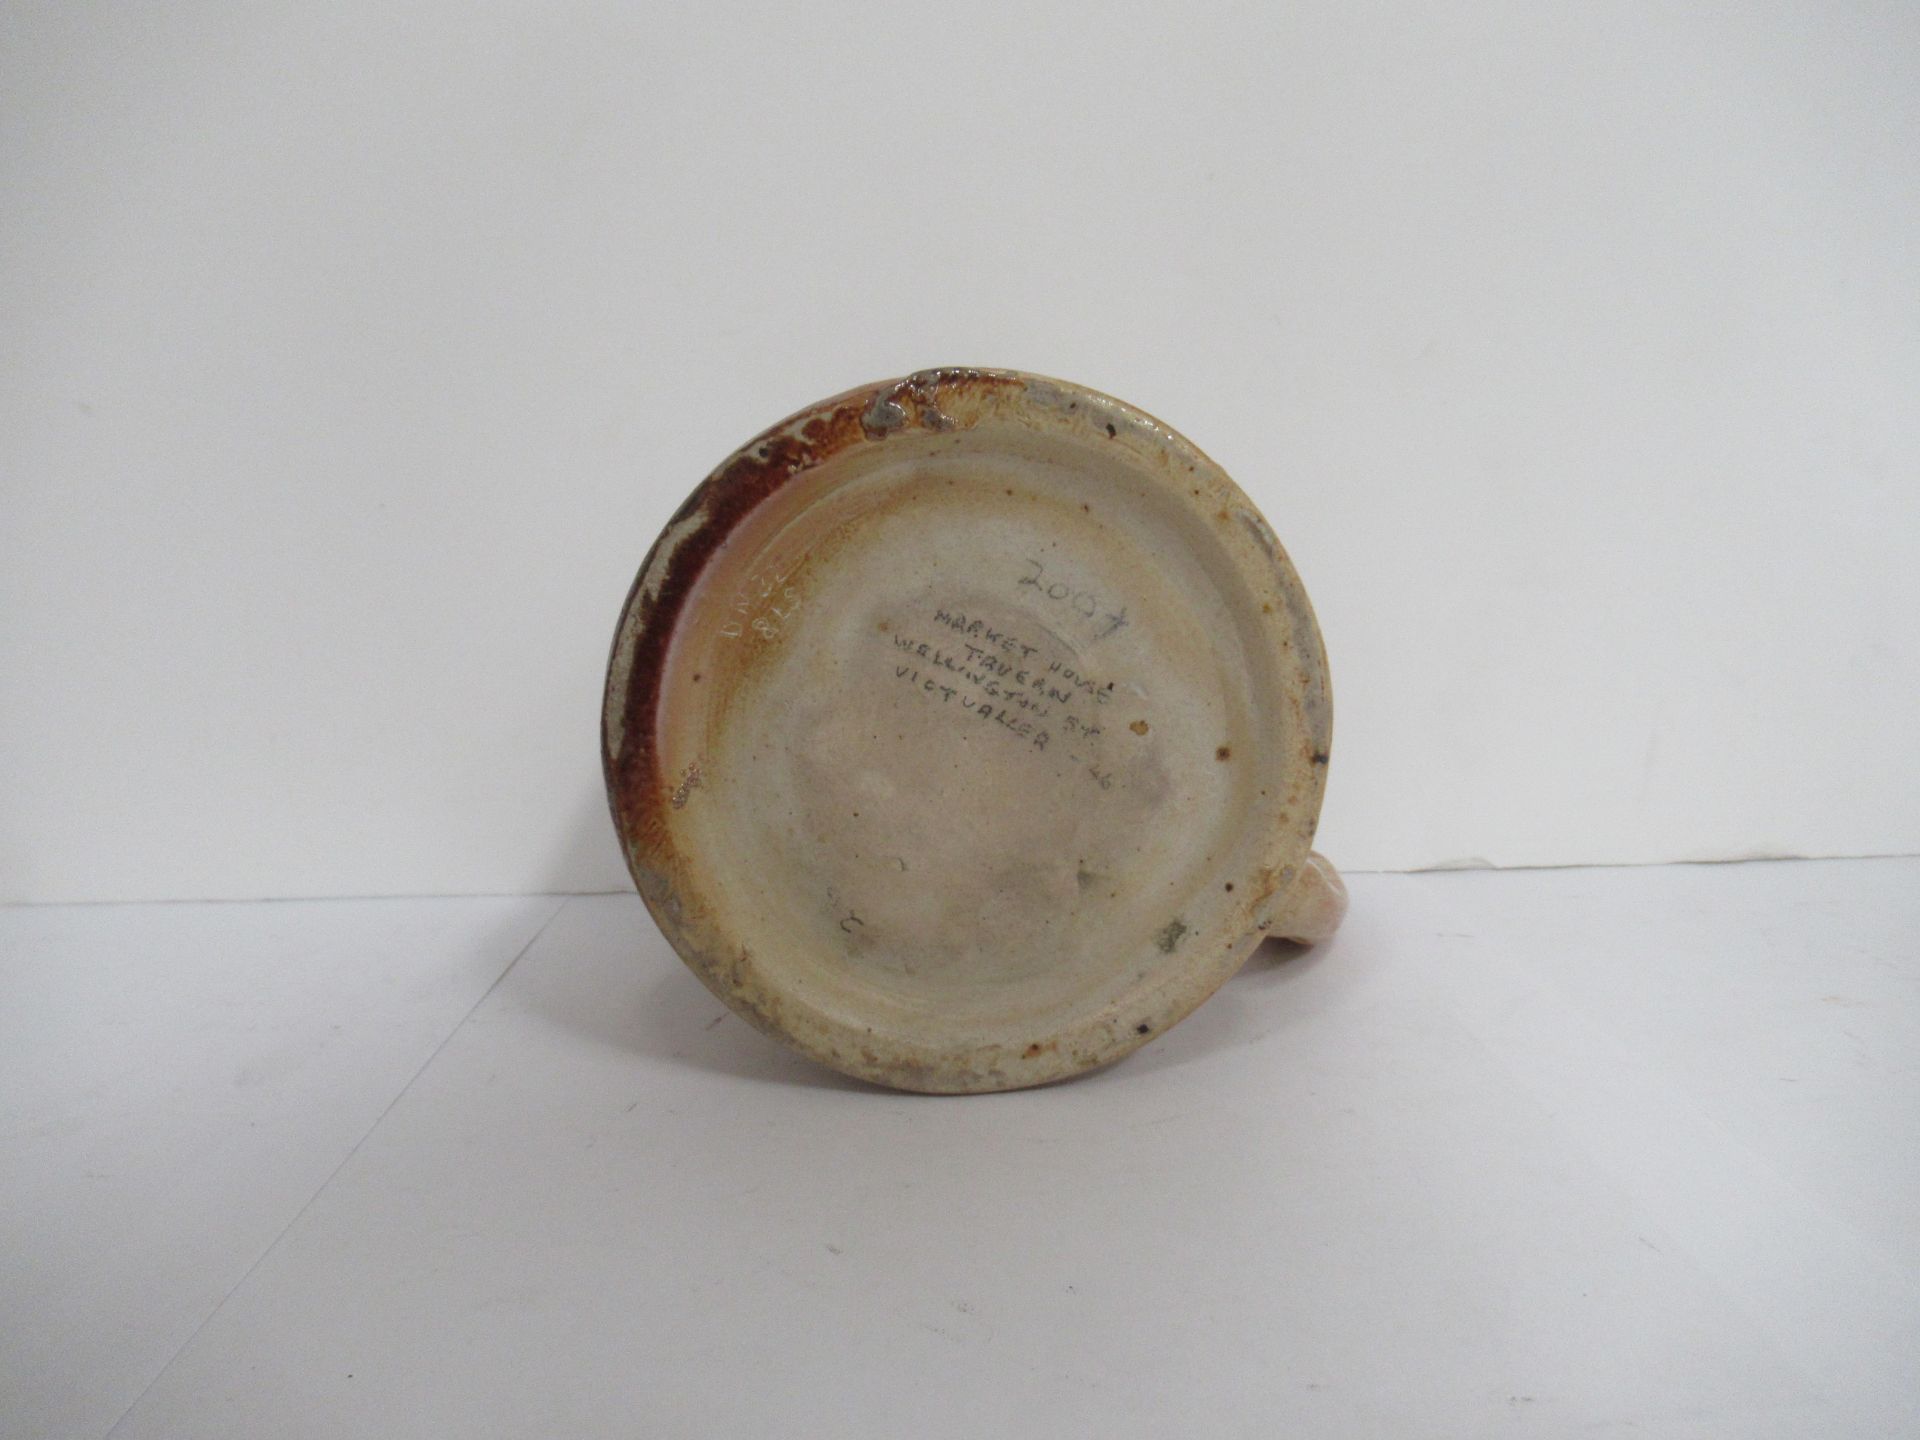 H.Green Humber Bank, Hull stone drinking vessel with greyhound handle - Image 6 of 7